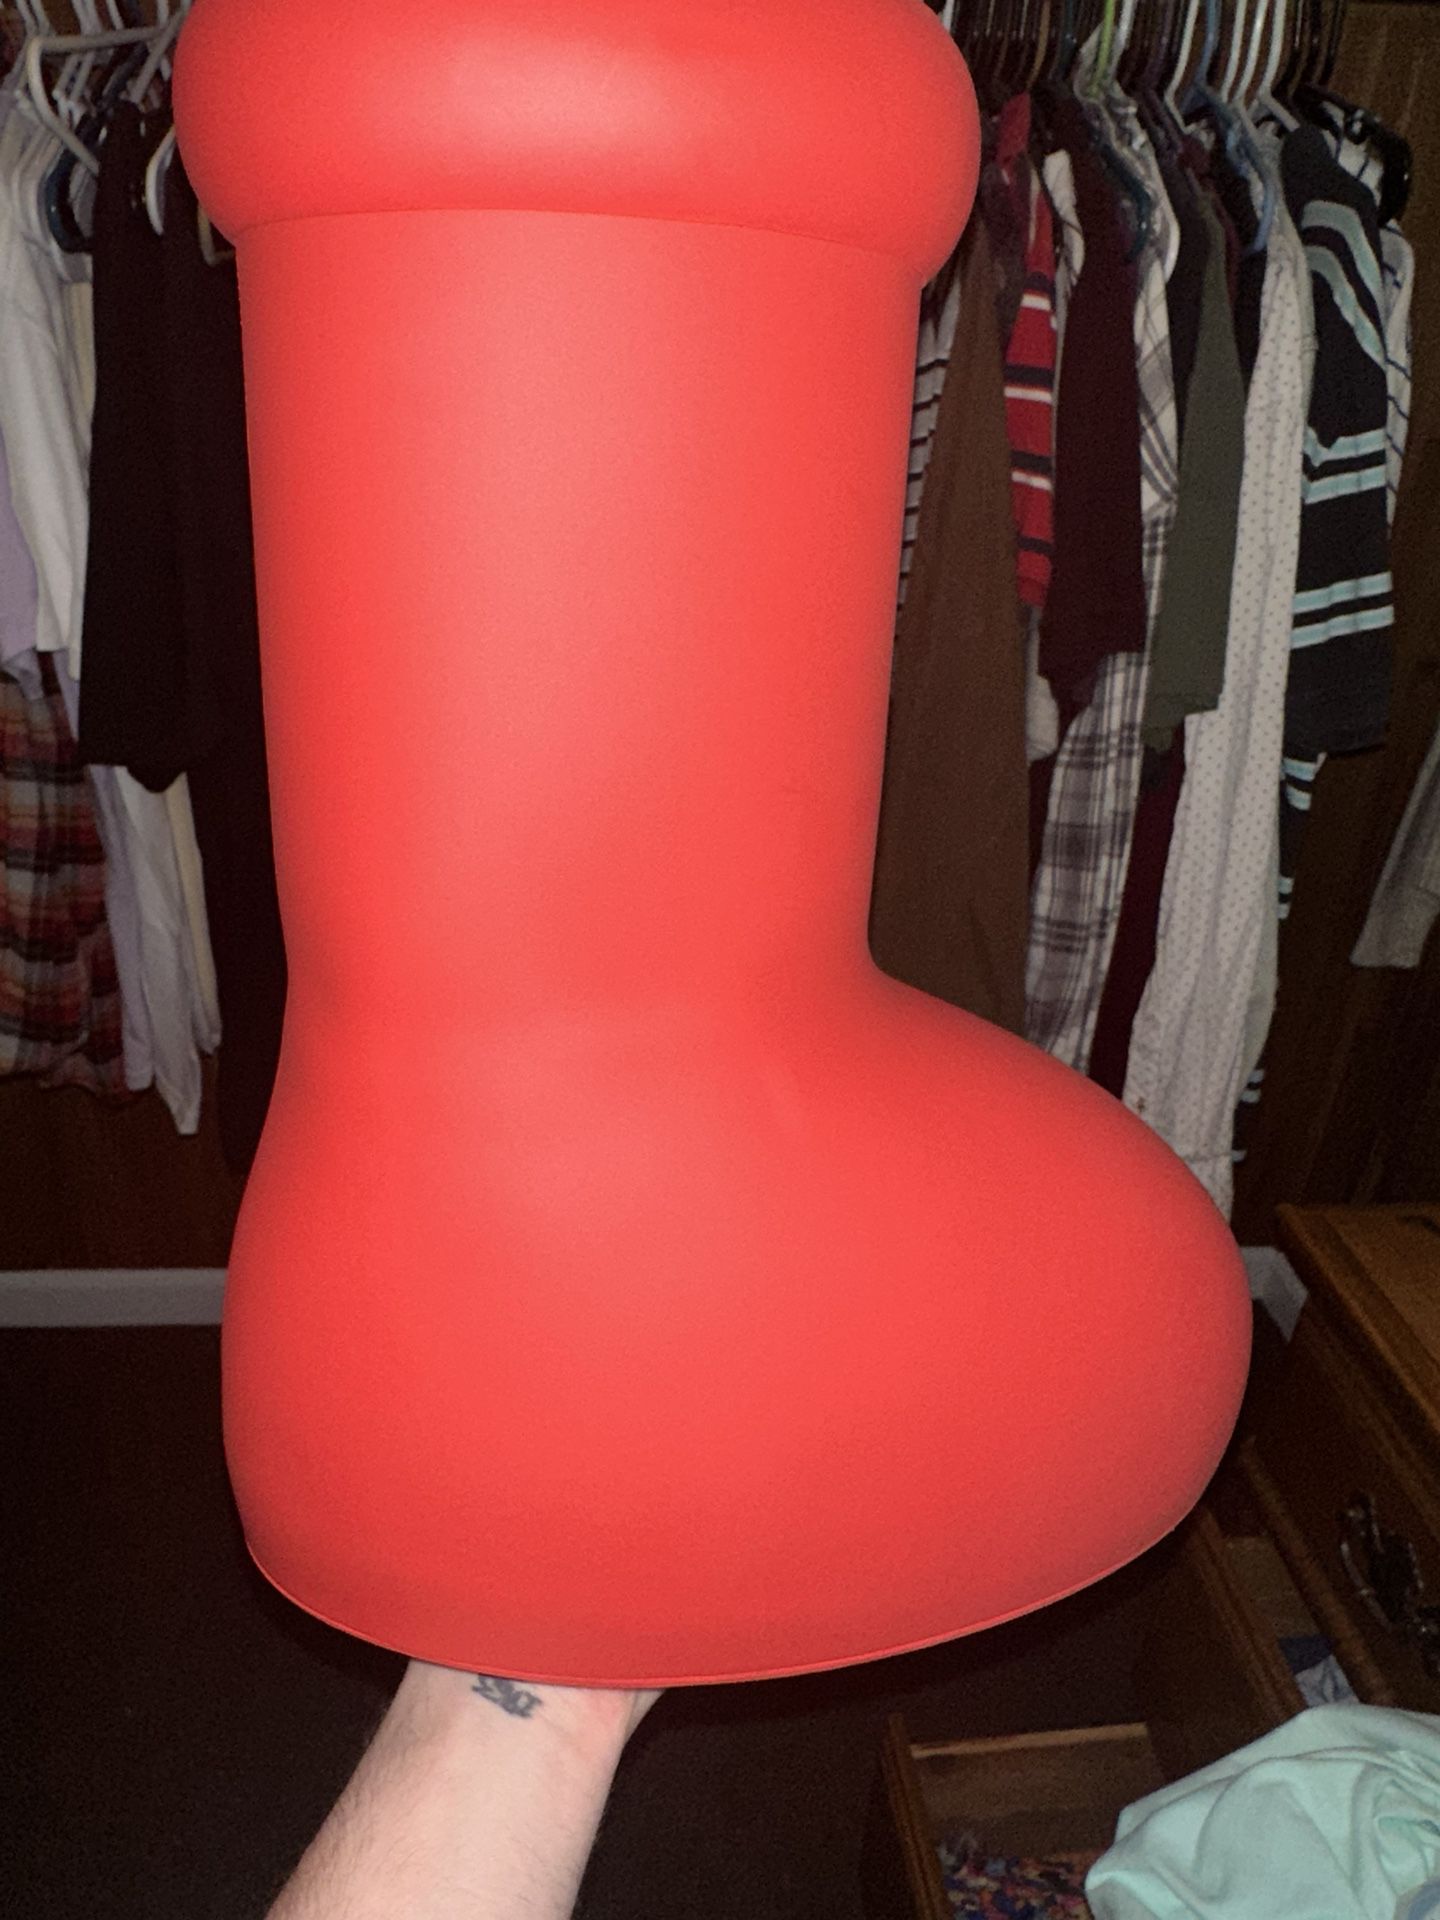 Big Red Boots